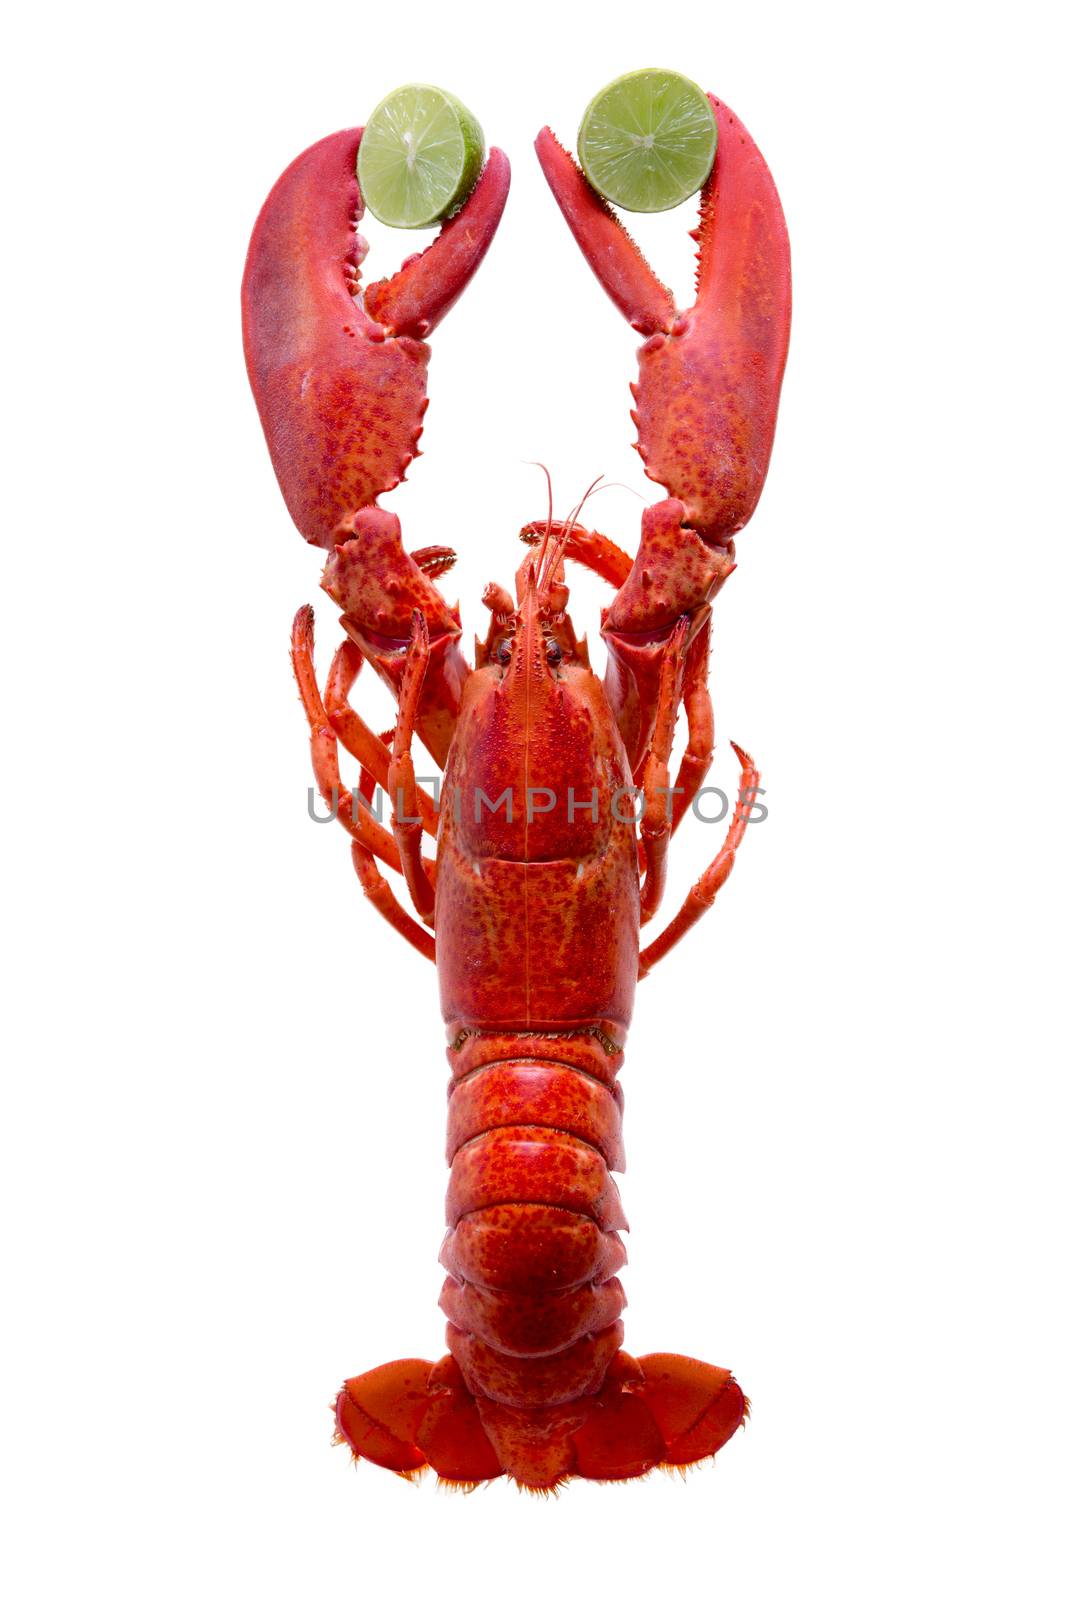 Close up One Cooked Red Lobster Clipping Lime Slices, Isolated on White Background.